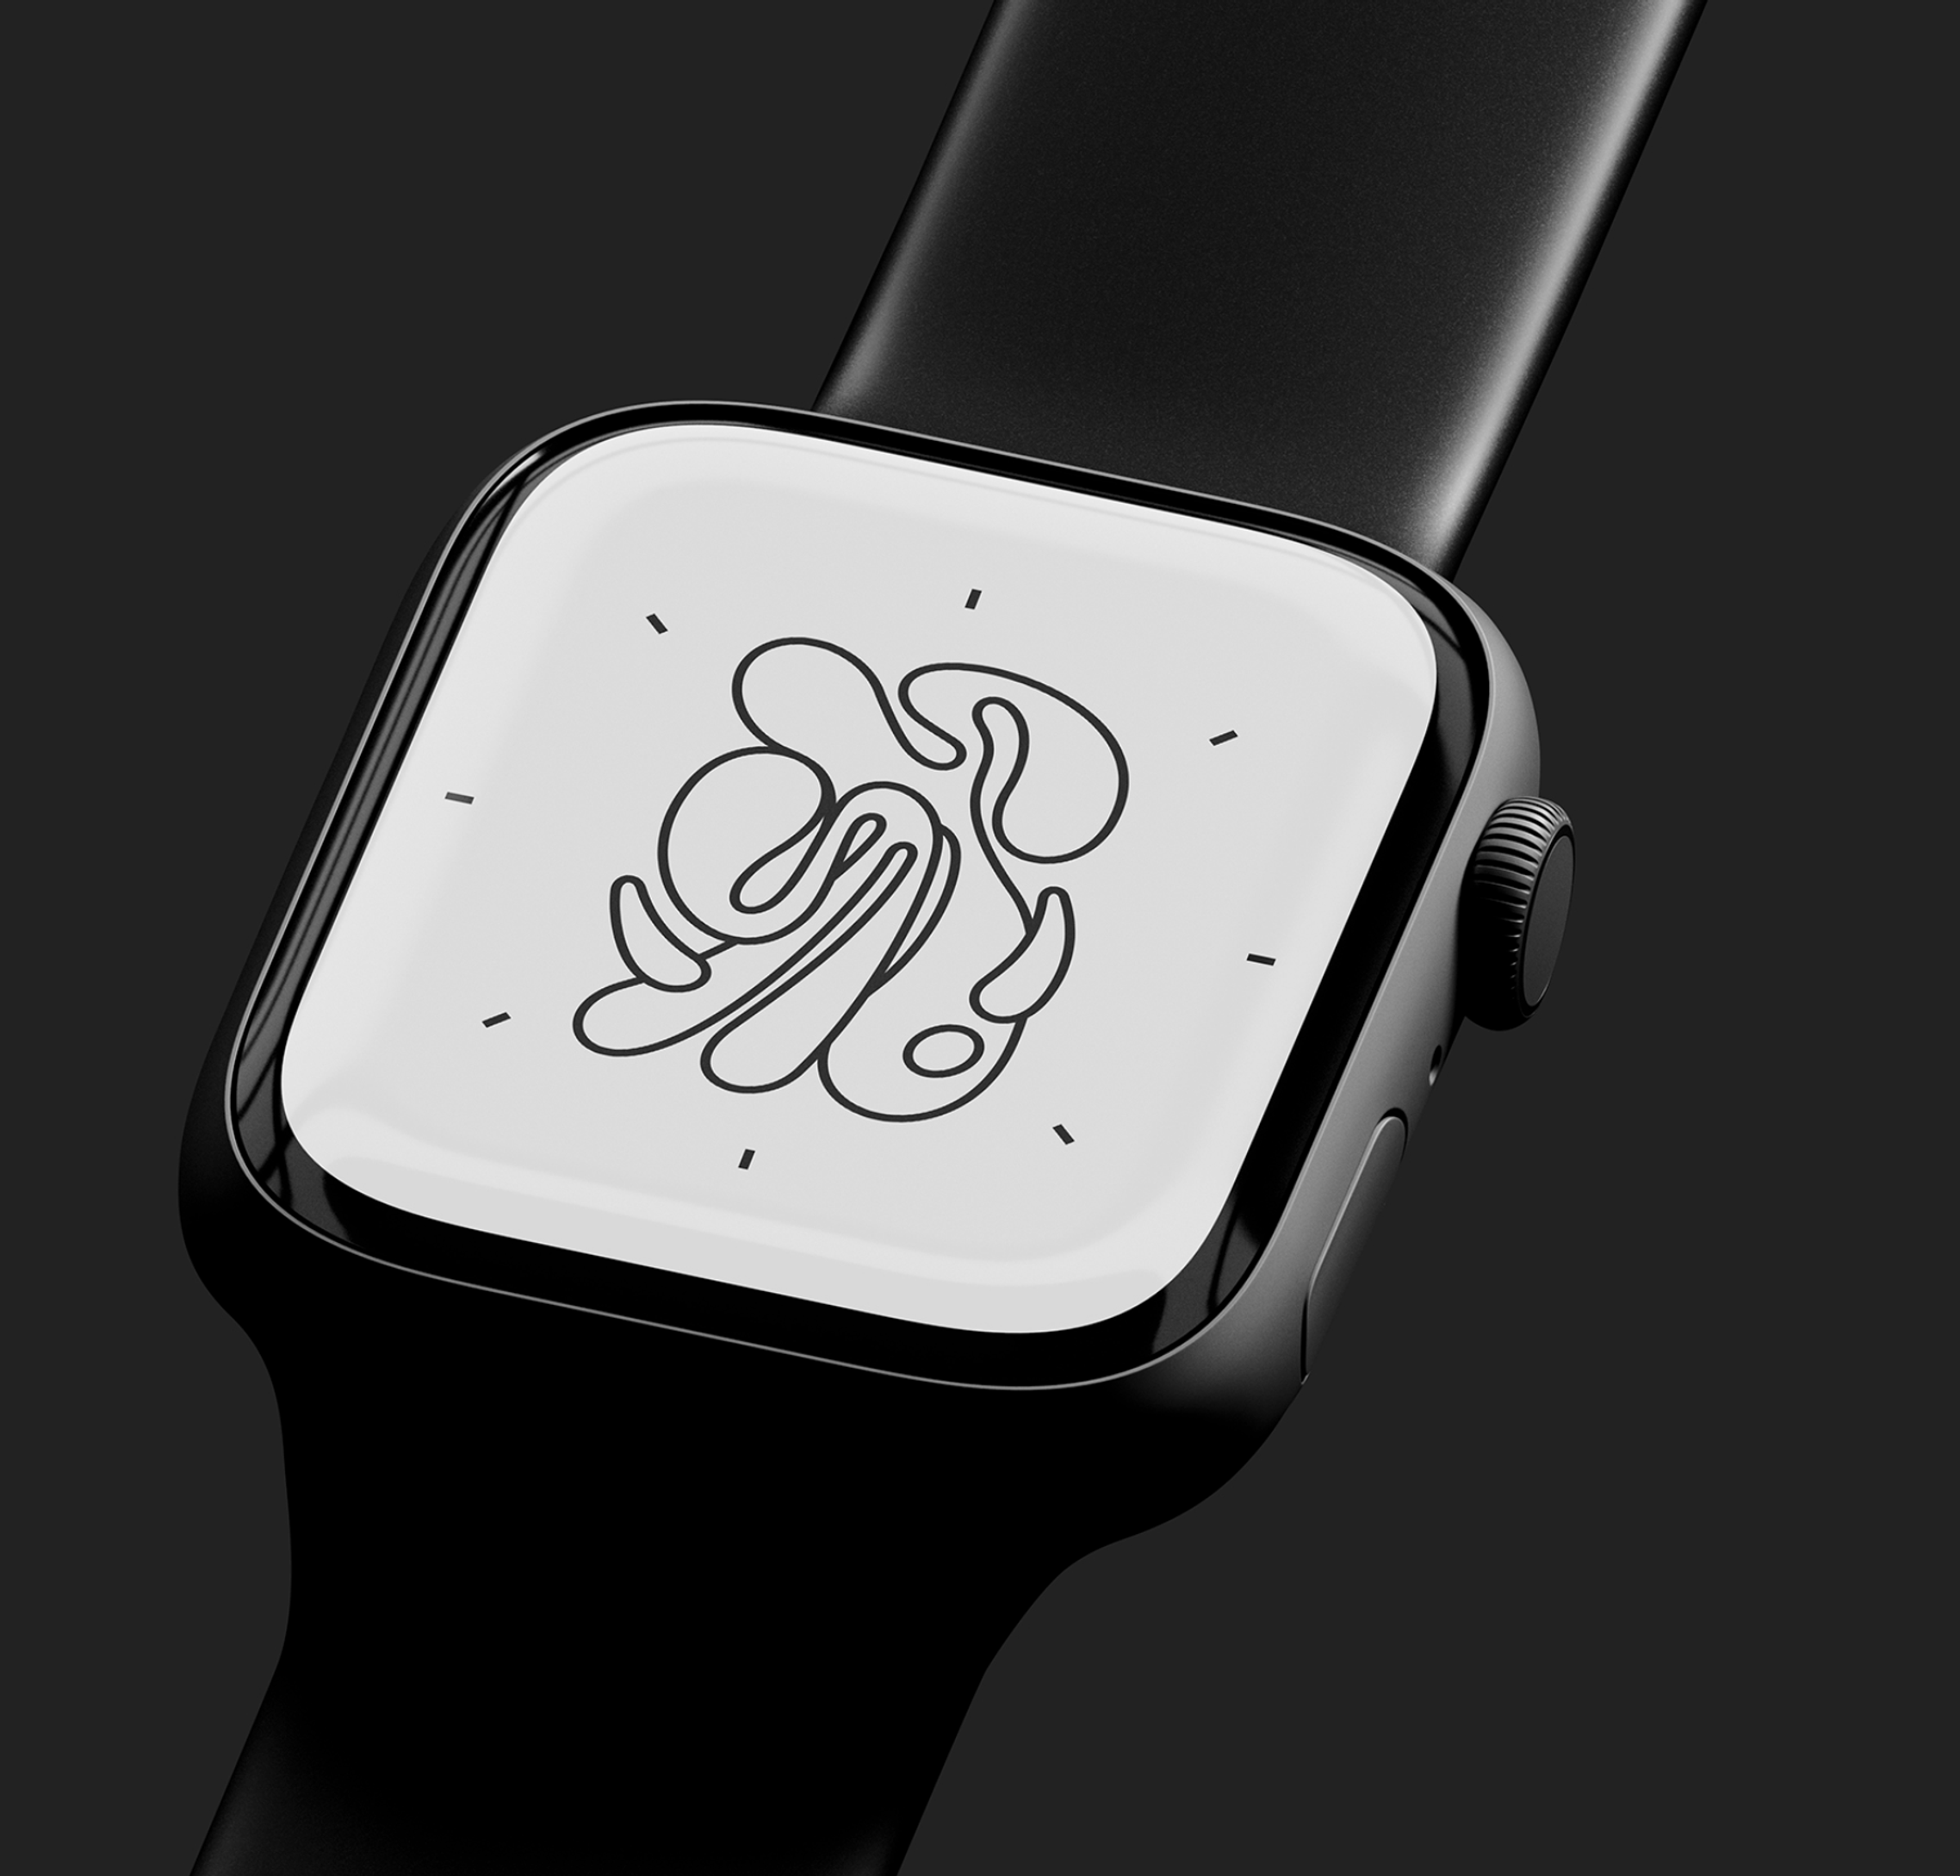 Digital Watch Background with Octopus Logo